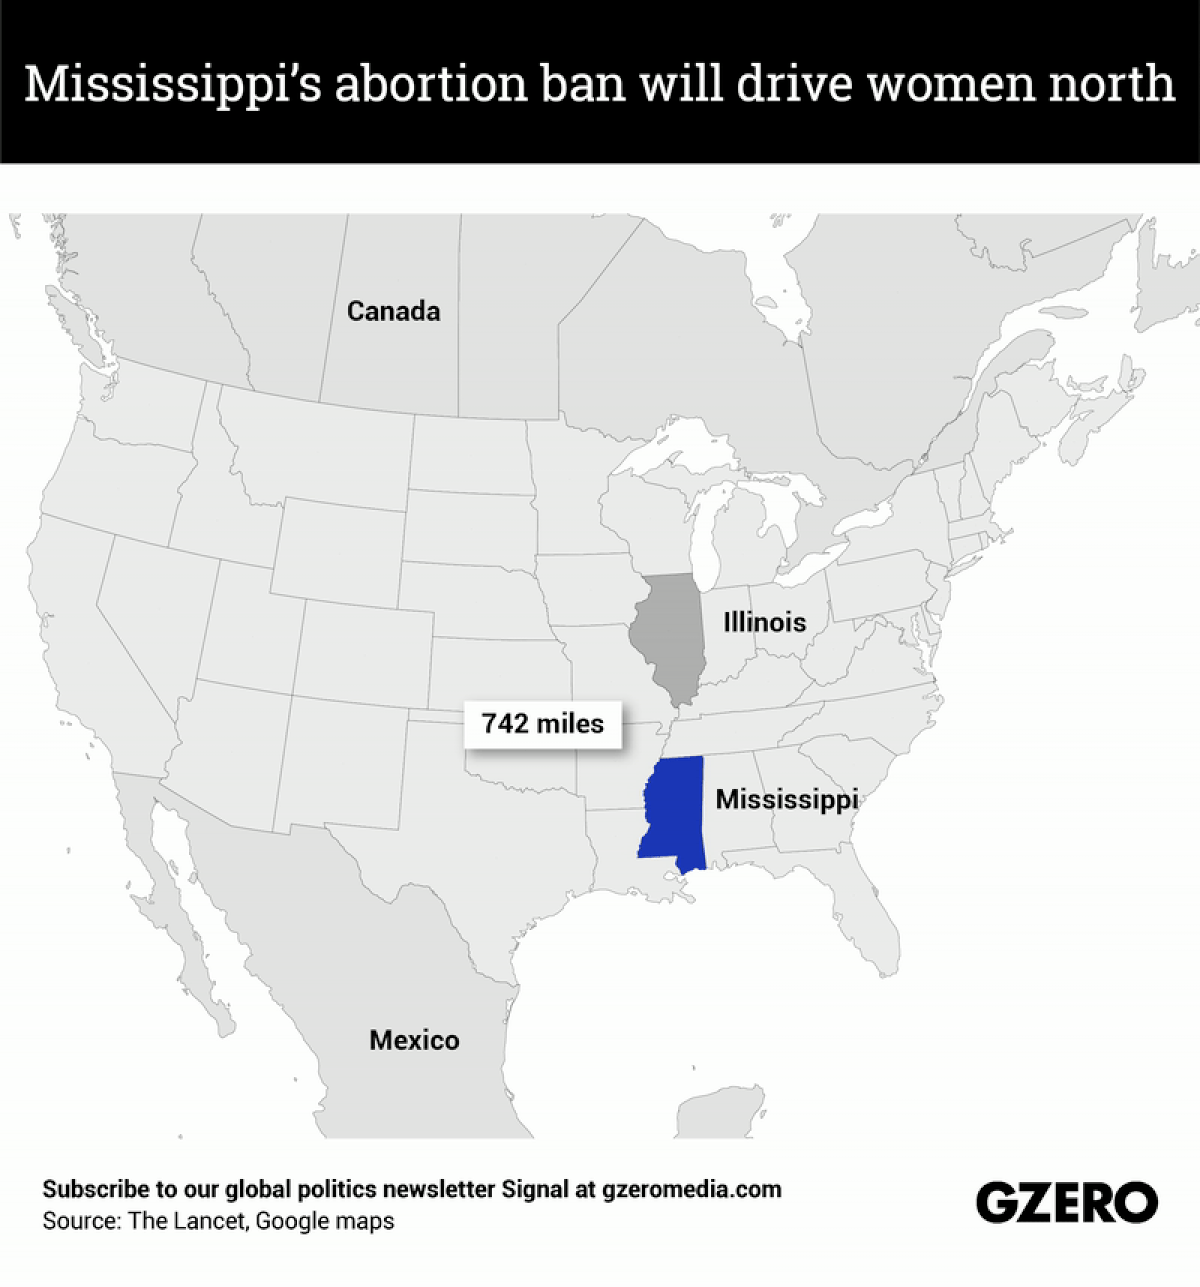 a graphical illustration of how Mississippi abortion ban will drive women north for abortion procedures.